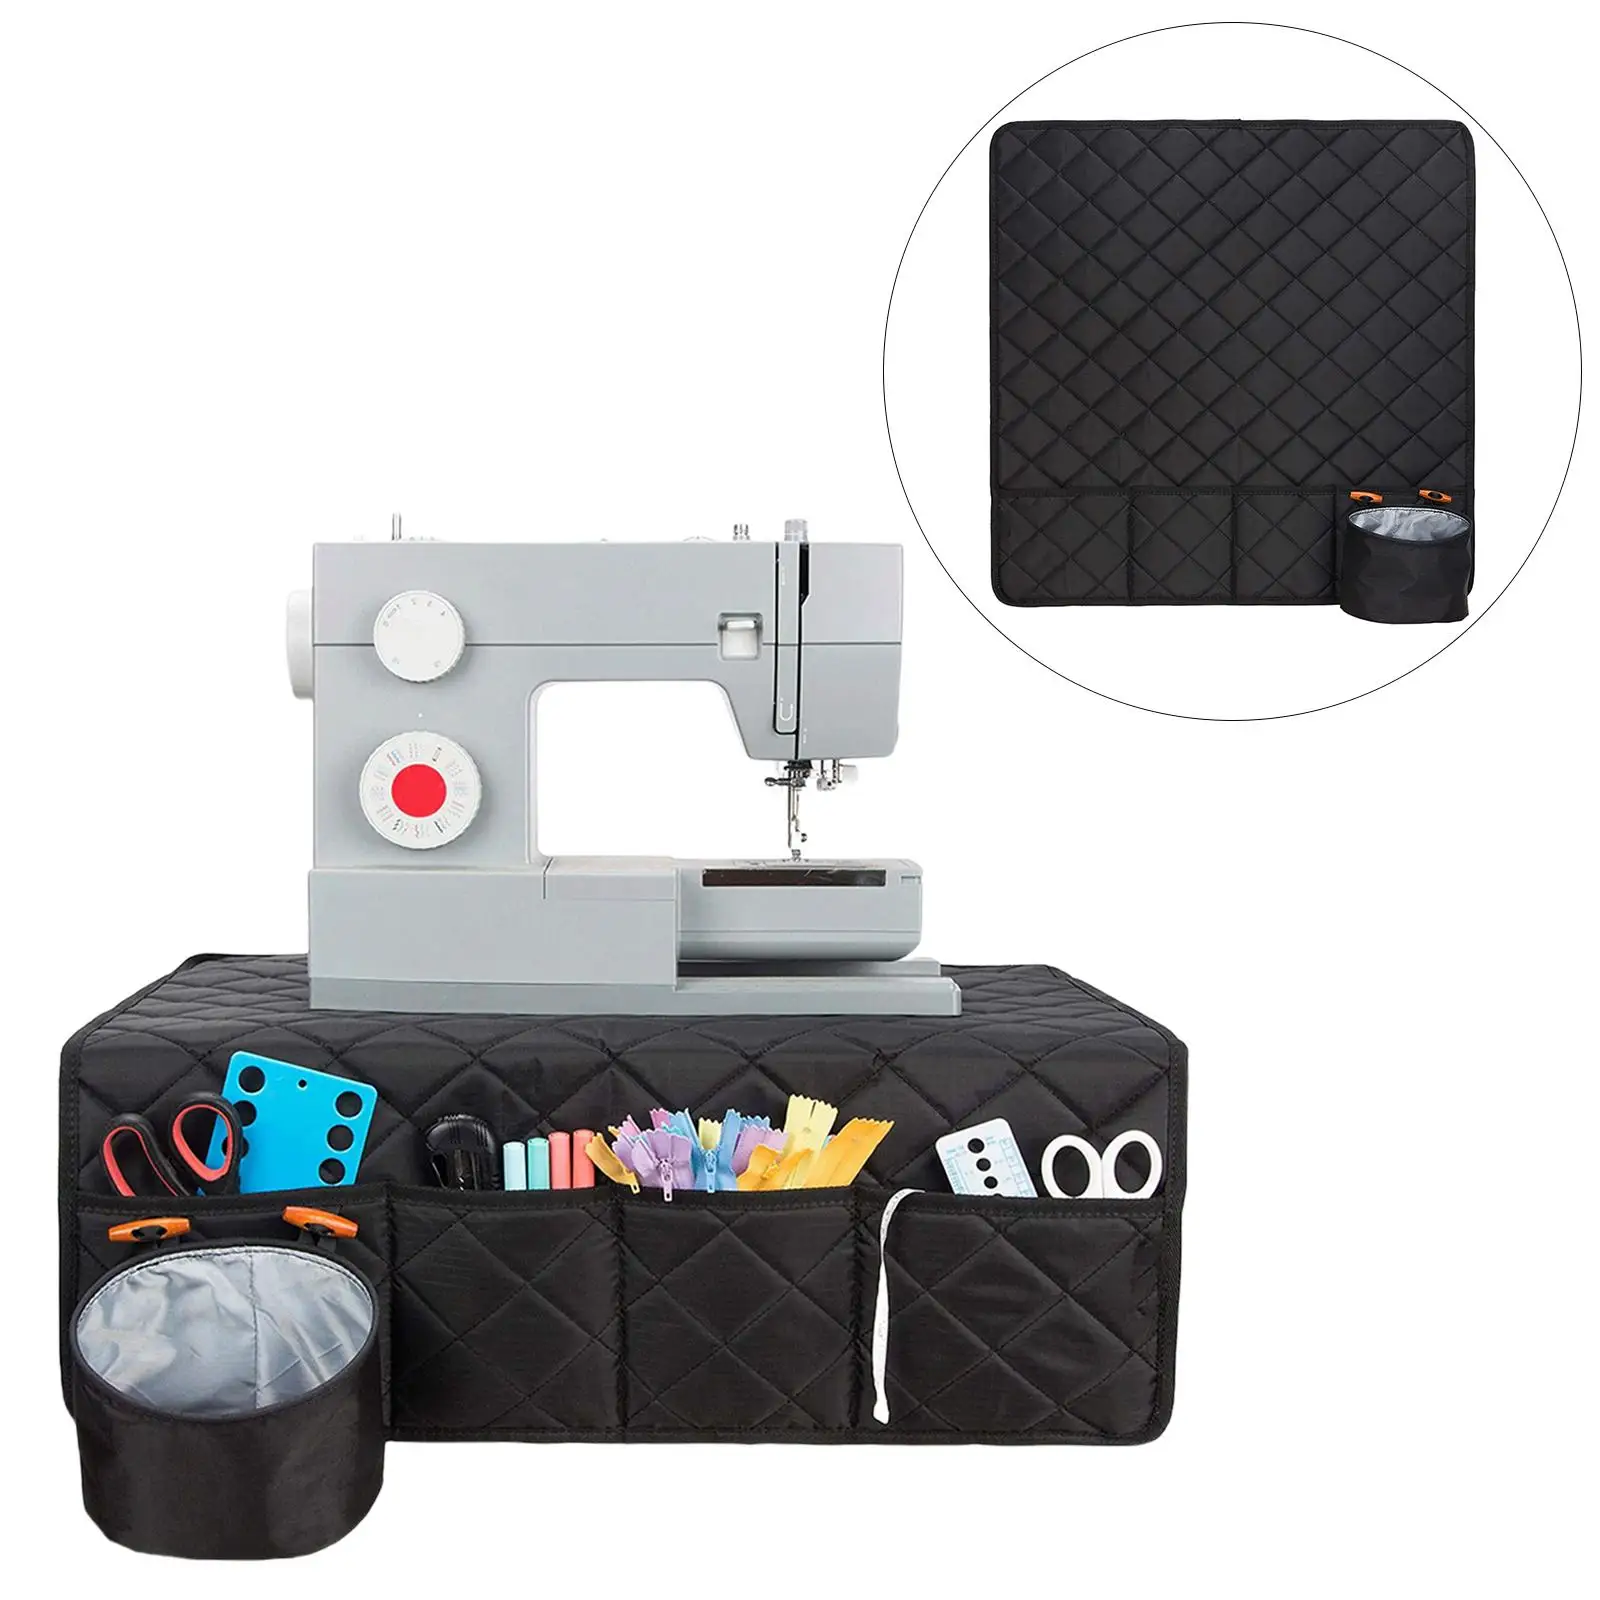 Sewing Machine Mat for Table with Pockets, Water-Resistant Sewing Machine Pad Organizer for Sewing Accessories